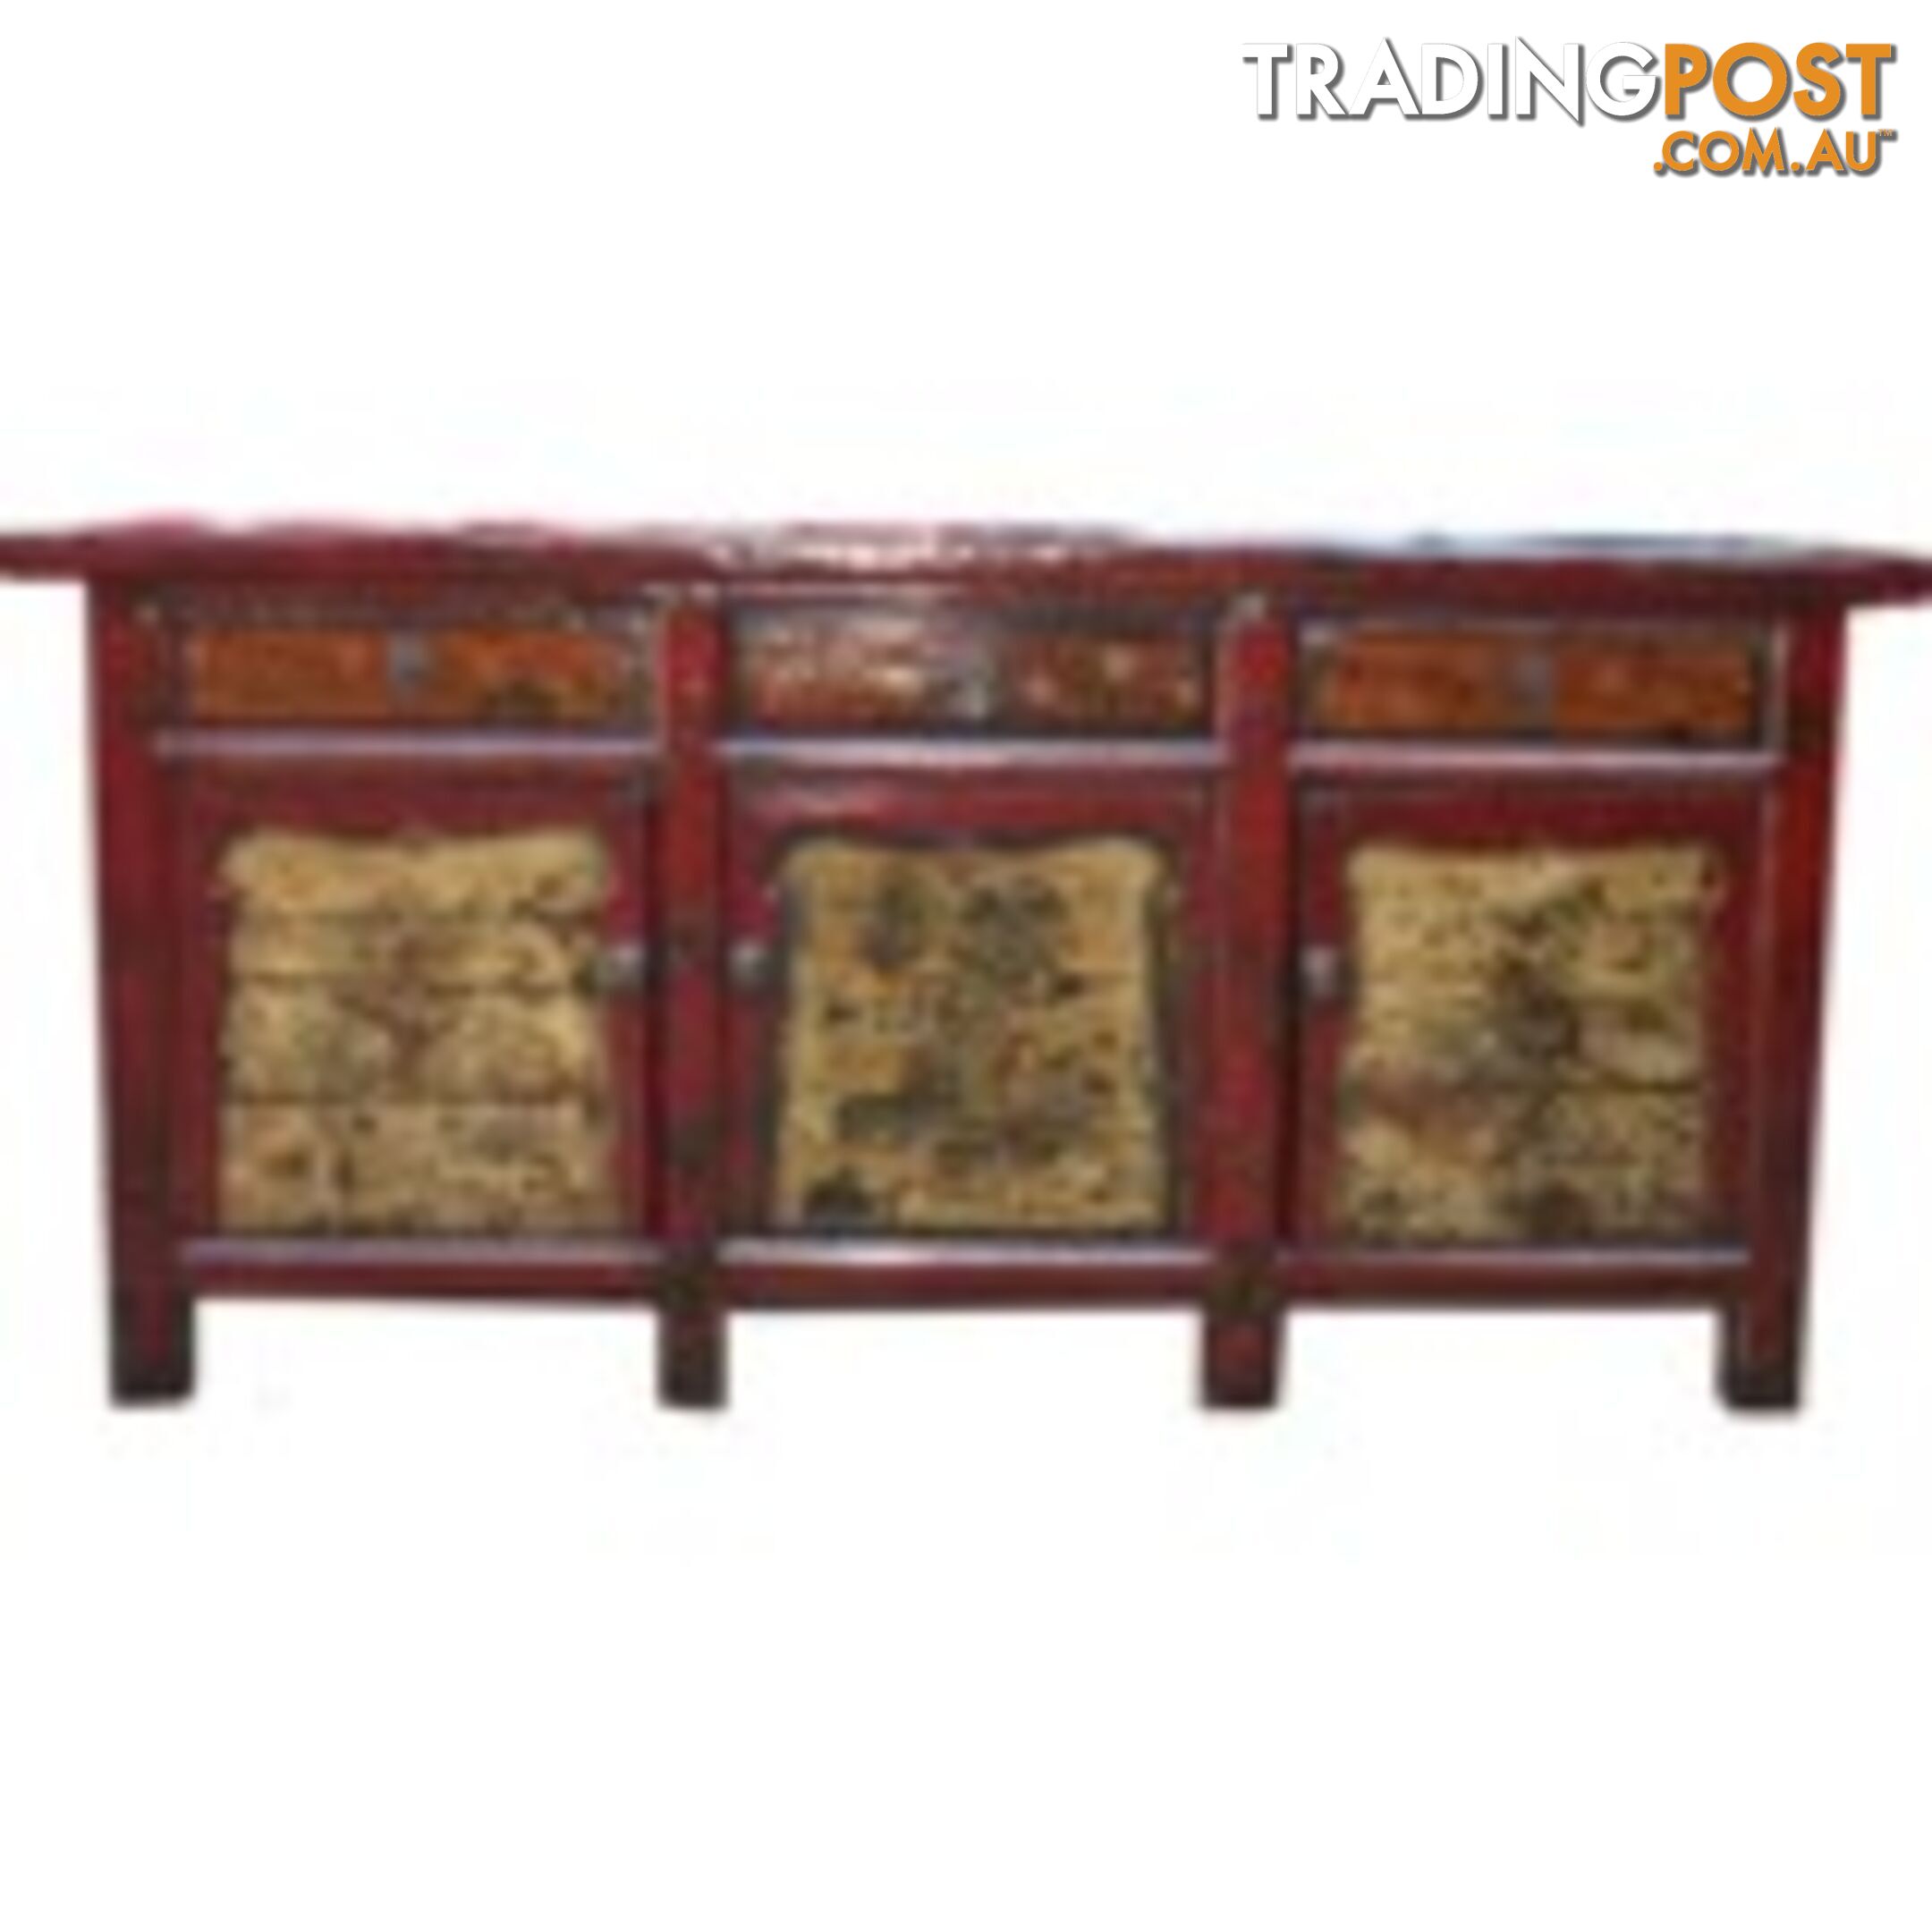 Large Antique Mongolian Style Painted Sideboard